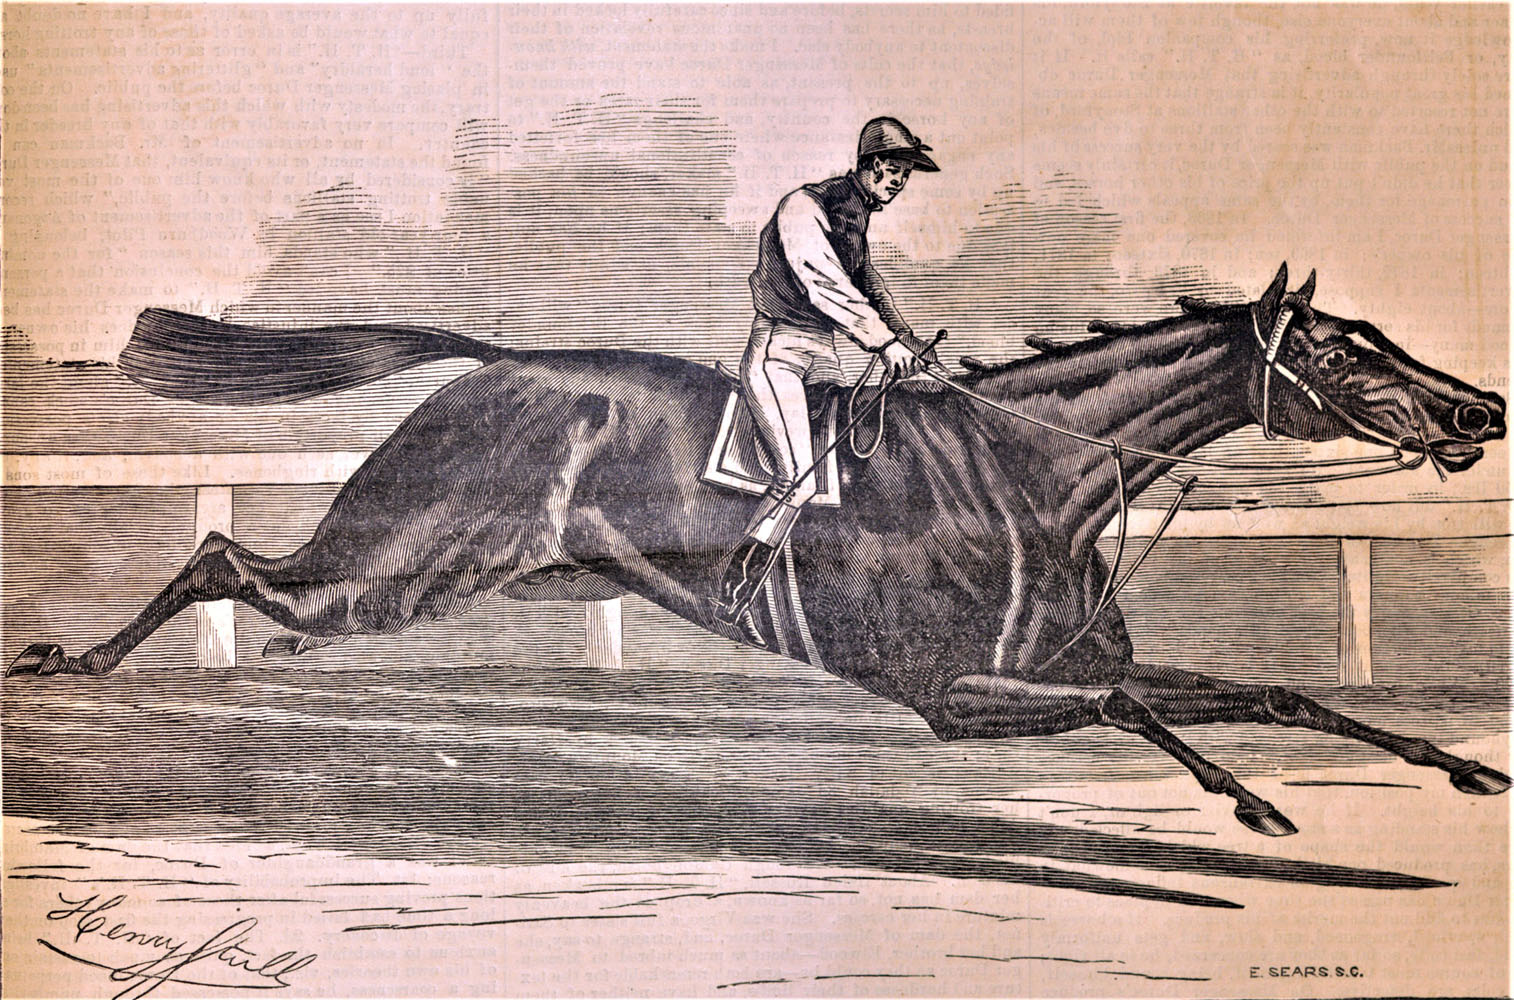 An illustration of Tom Ochiltree by Henry Stull from "The Spirit of the Times," July, 15, 1876 (Keeneland Library Collection)